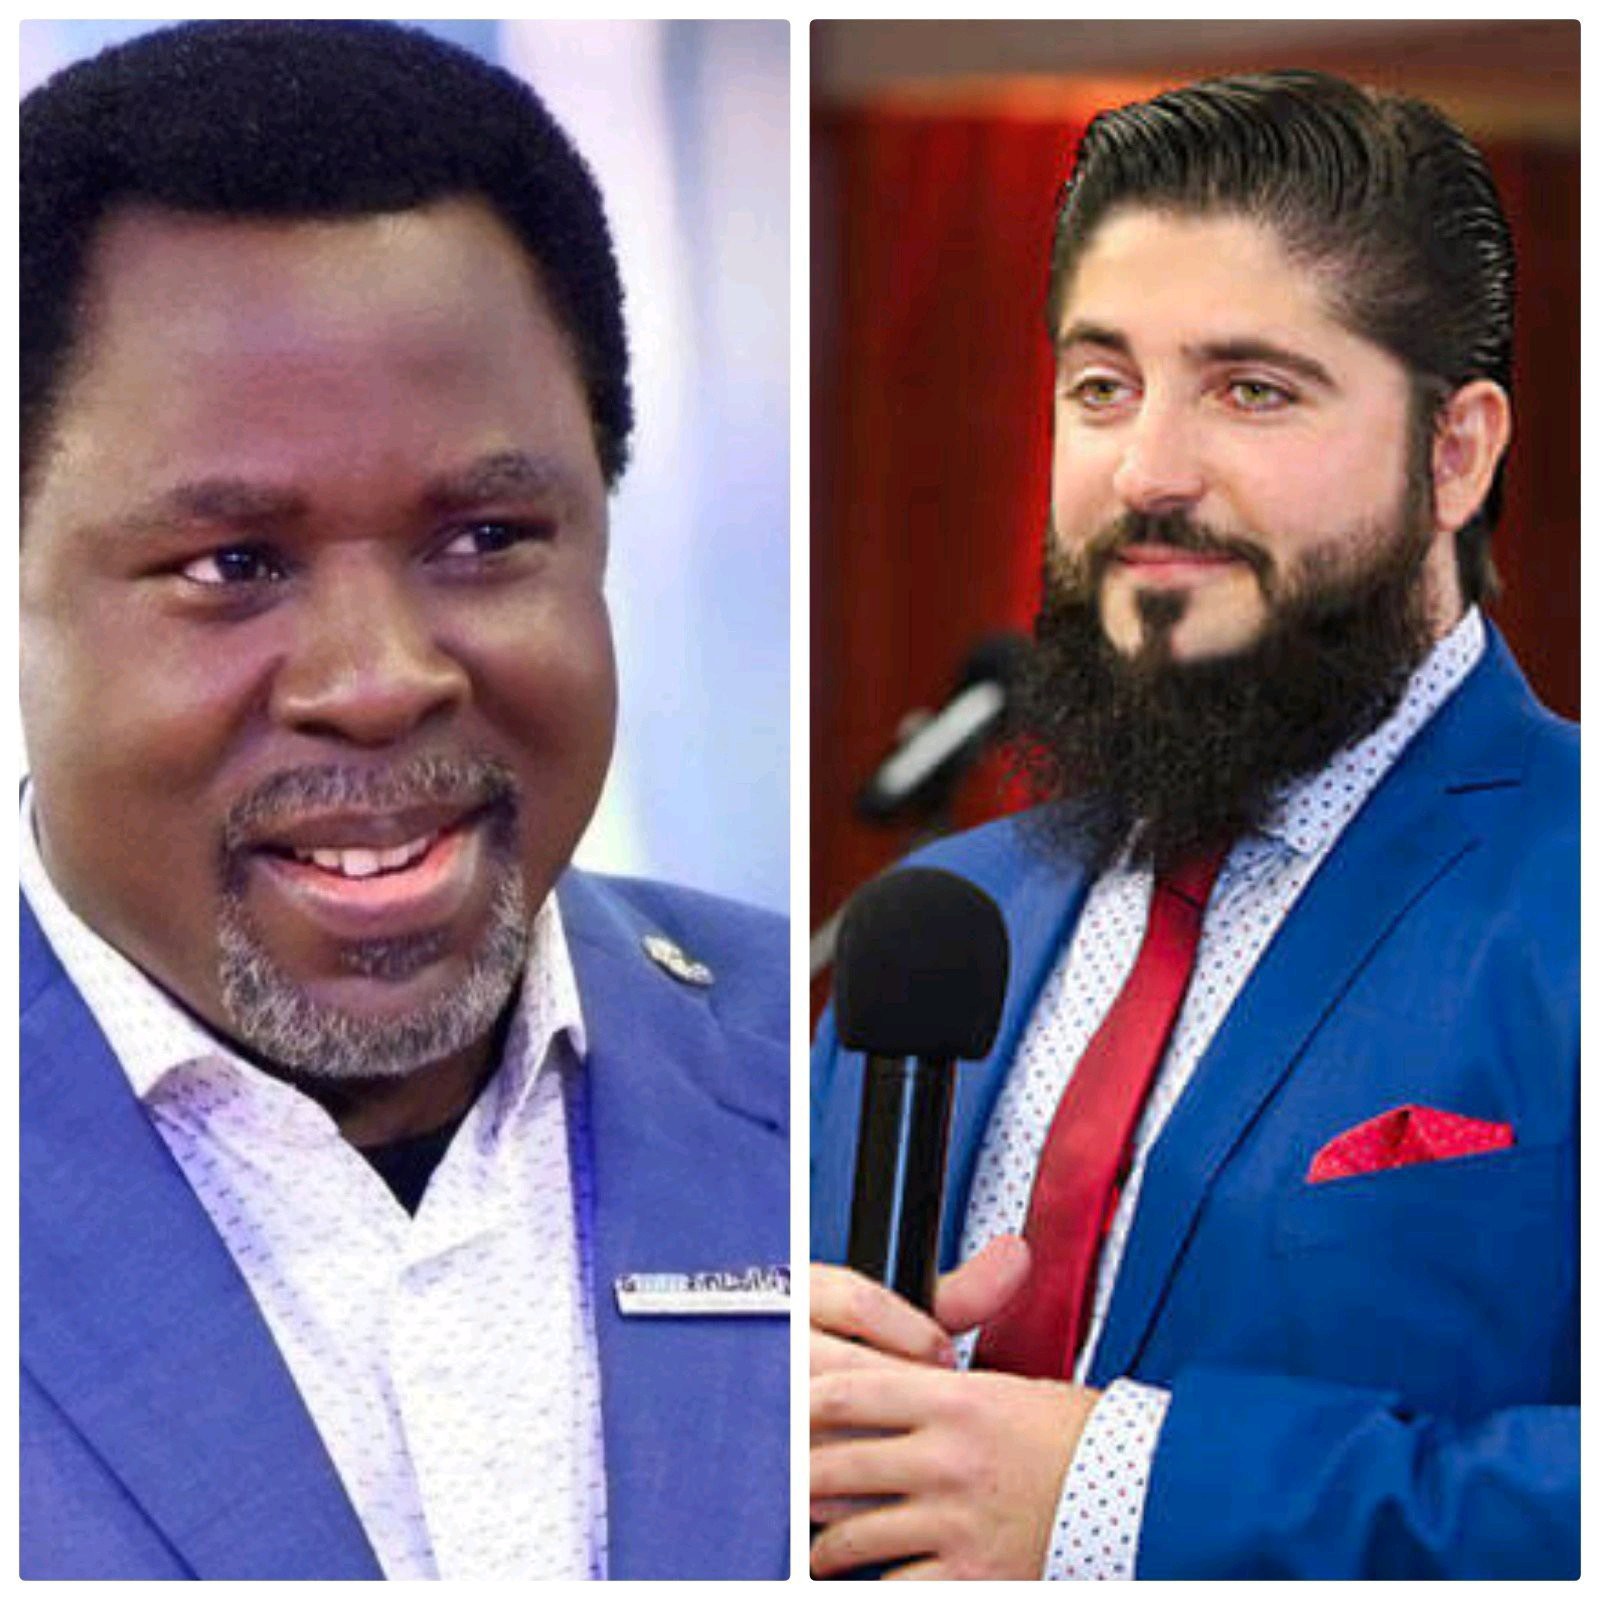 You Will Be Surprised That Pastors Came Out To Celebrate Saying TB Joshua Is Finally Exposed—According to Wiseman